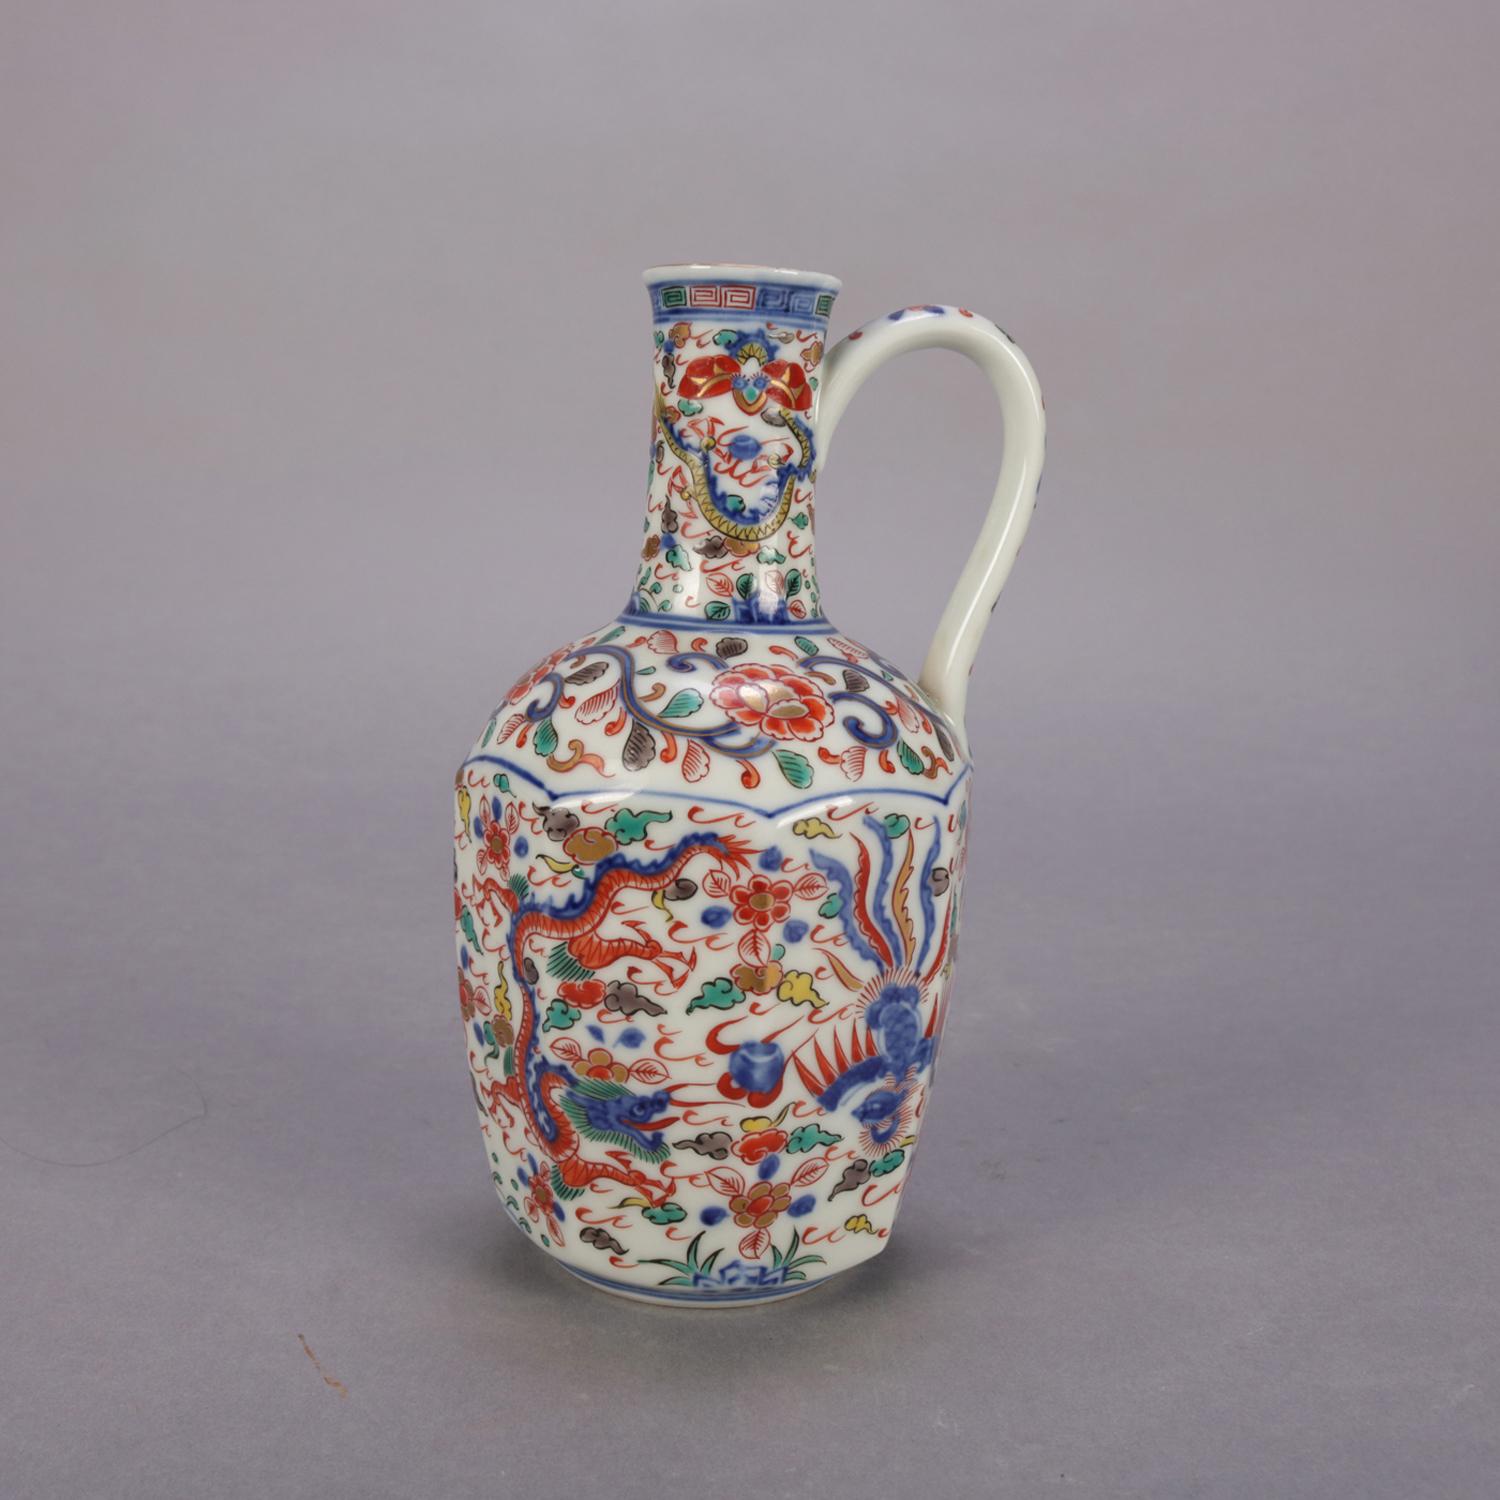 20th Century Chinese Hand Painted Porcelain Jug with Phoenix, Dragons and Lotus, Signed